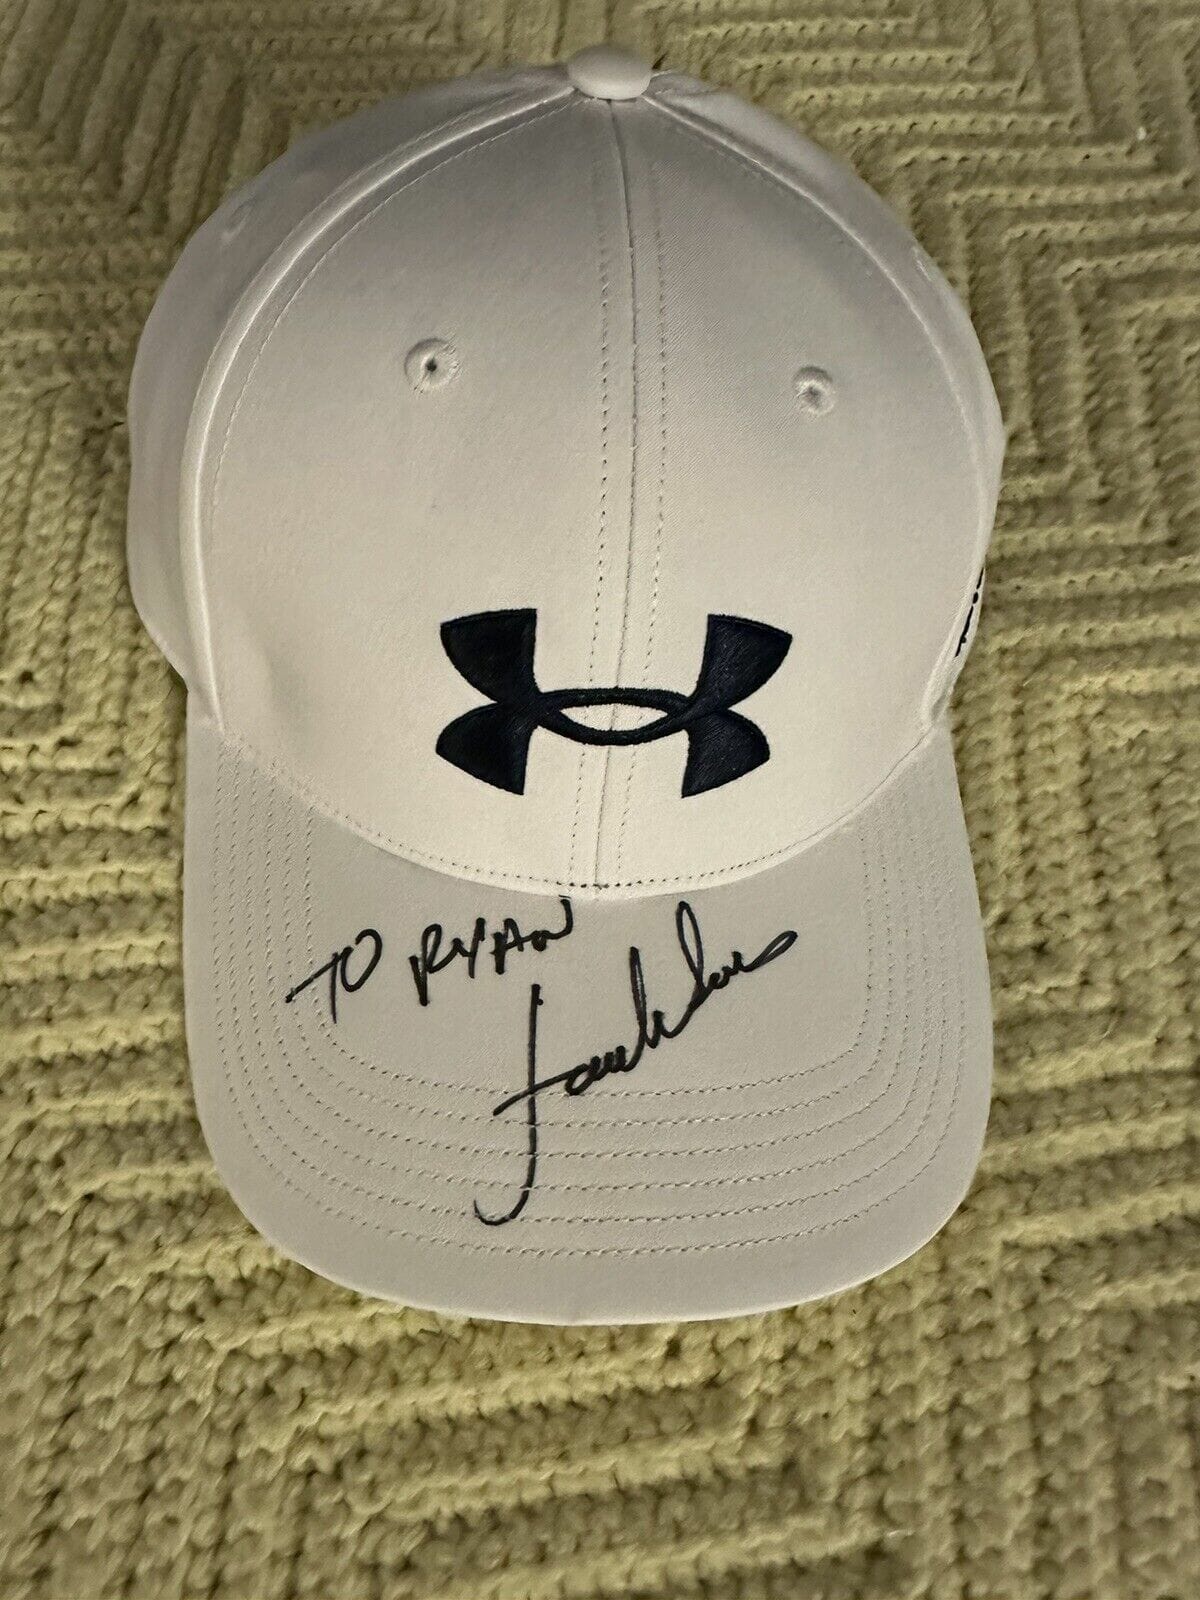 Jordan Spieth Signed New Under Armour Golf Hat Pga Tour Autographed Unused  Opens in a new window or tab